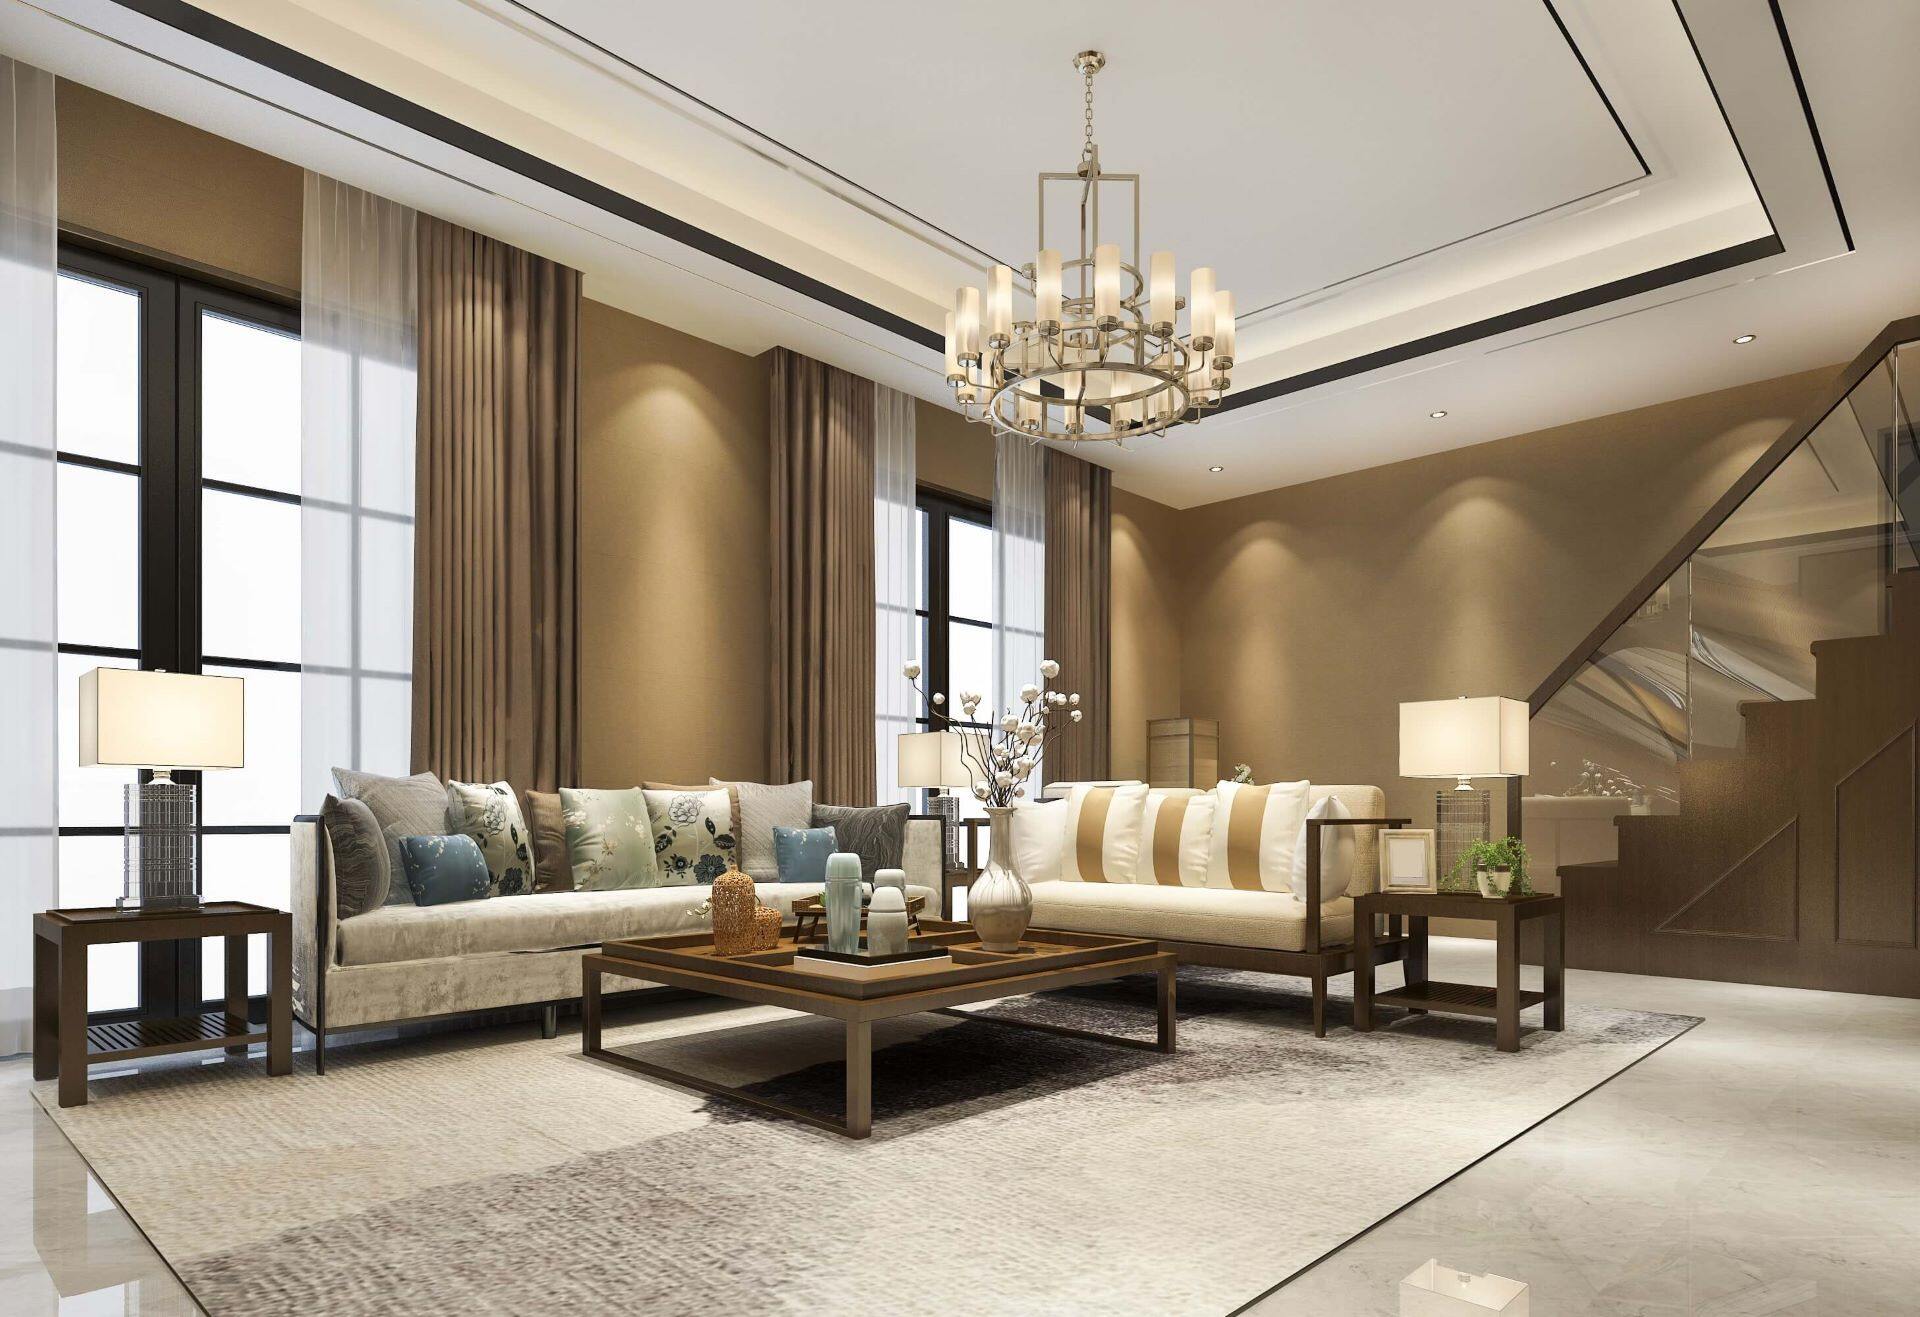 How Big Should A Chandelier Be For Living Room